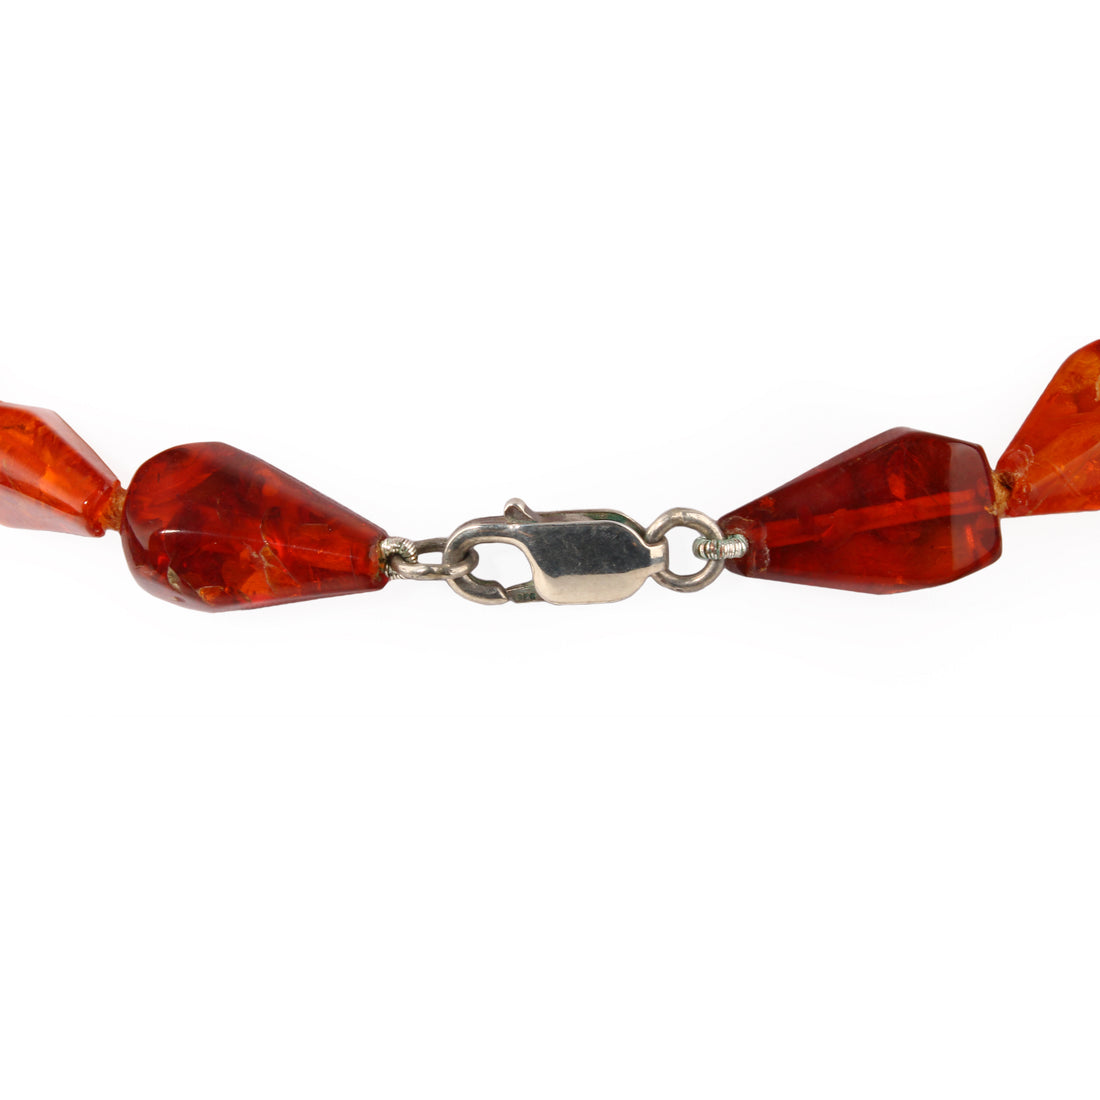 Baltic Amber Prism-Shaped Bead Necklace